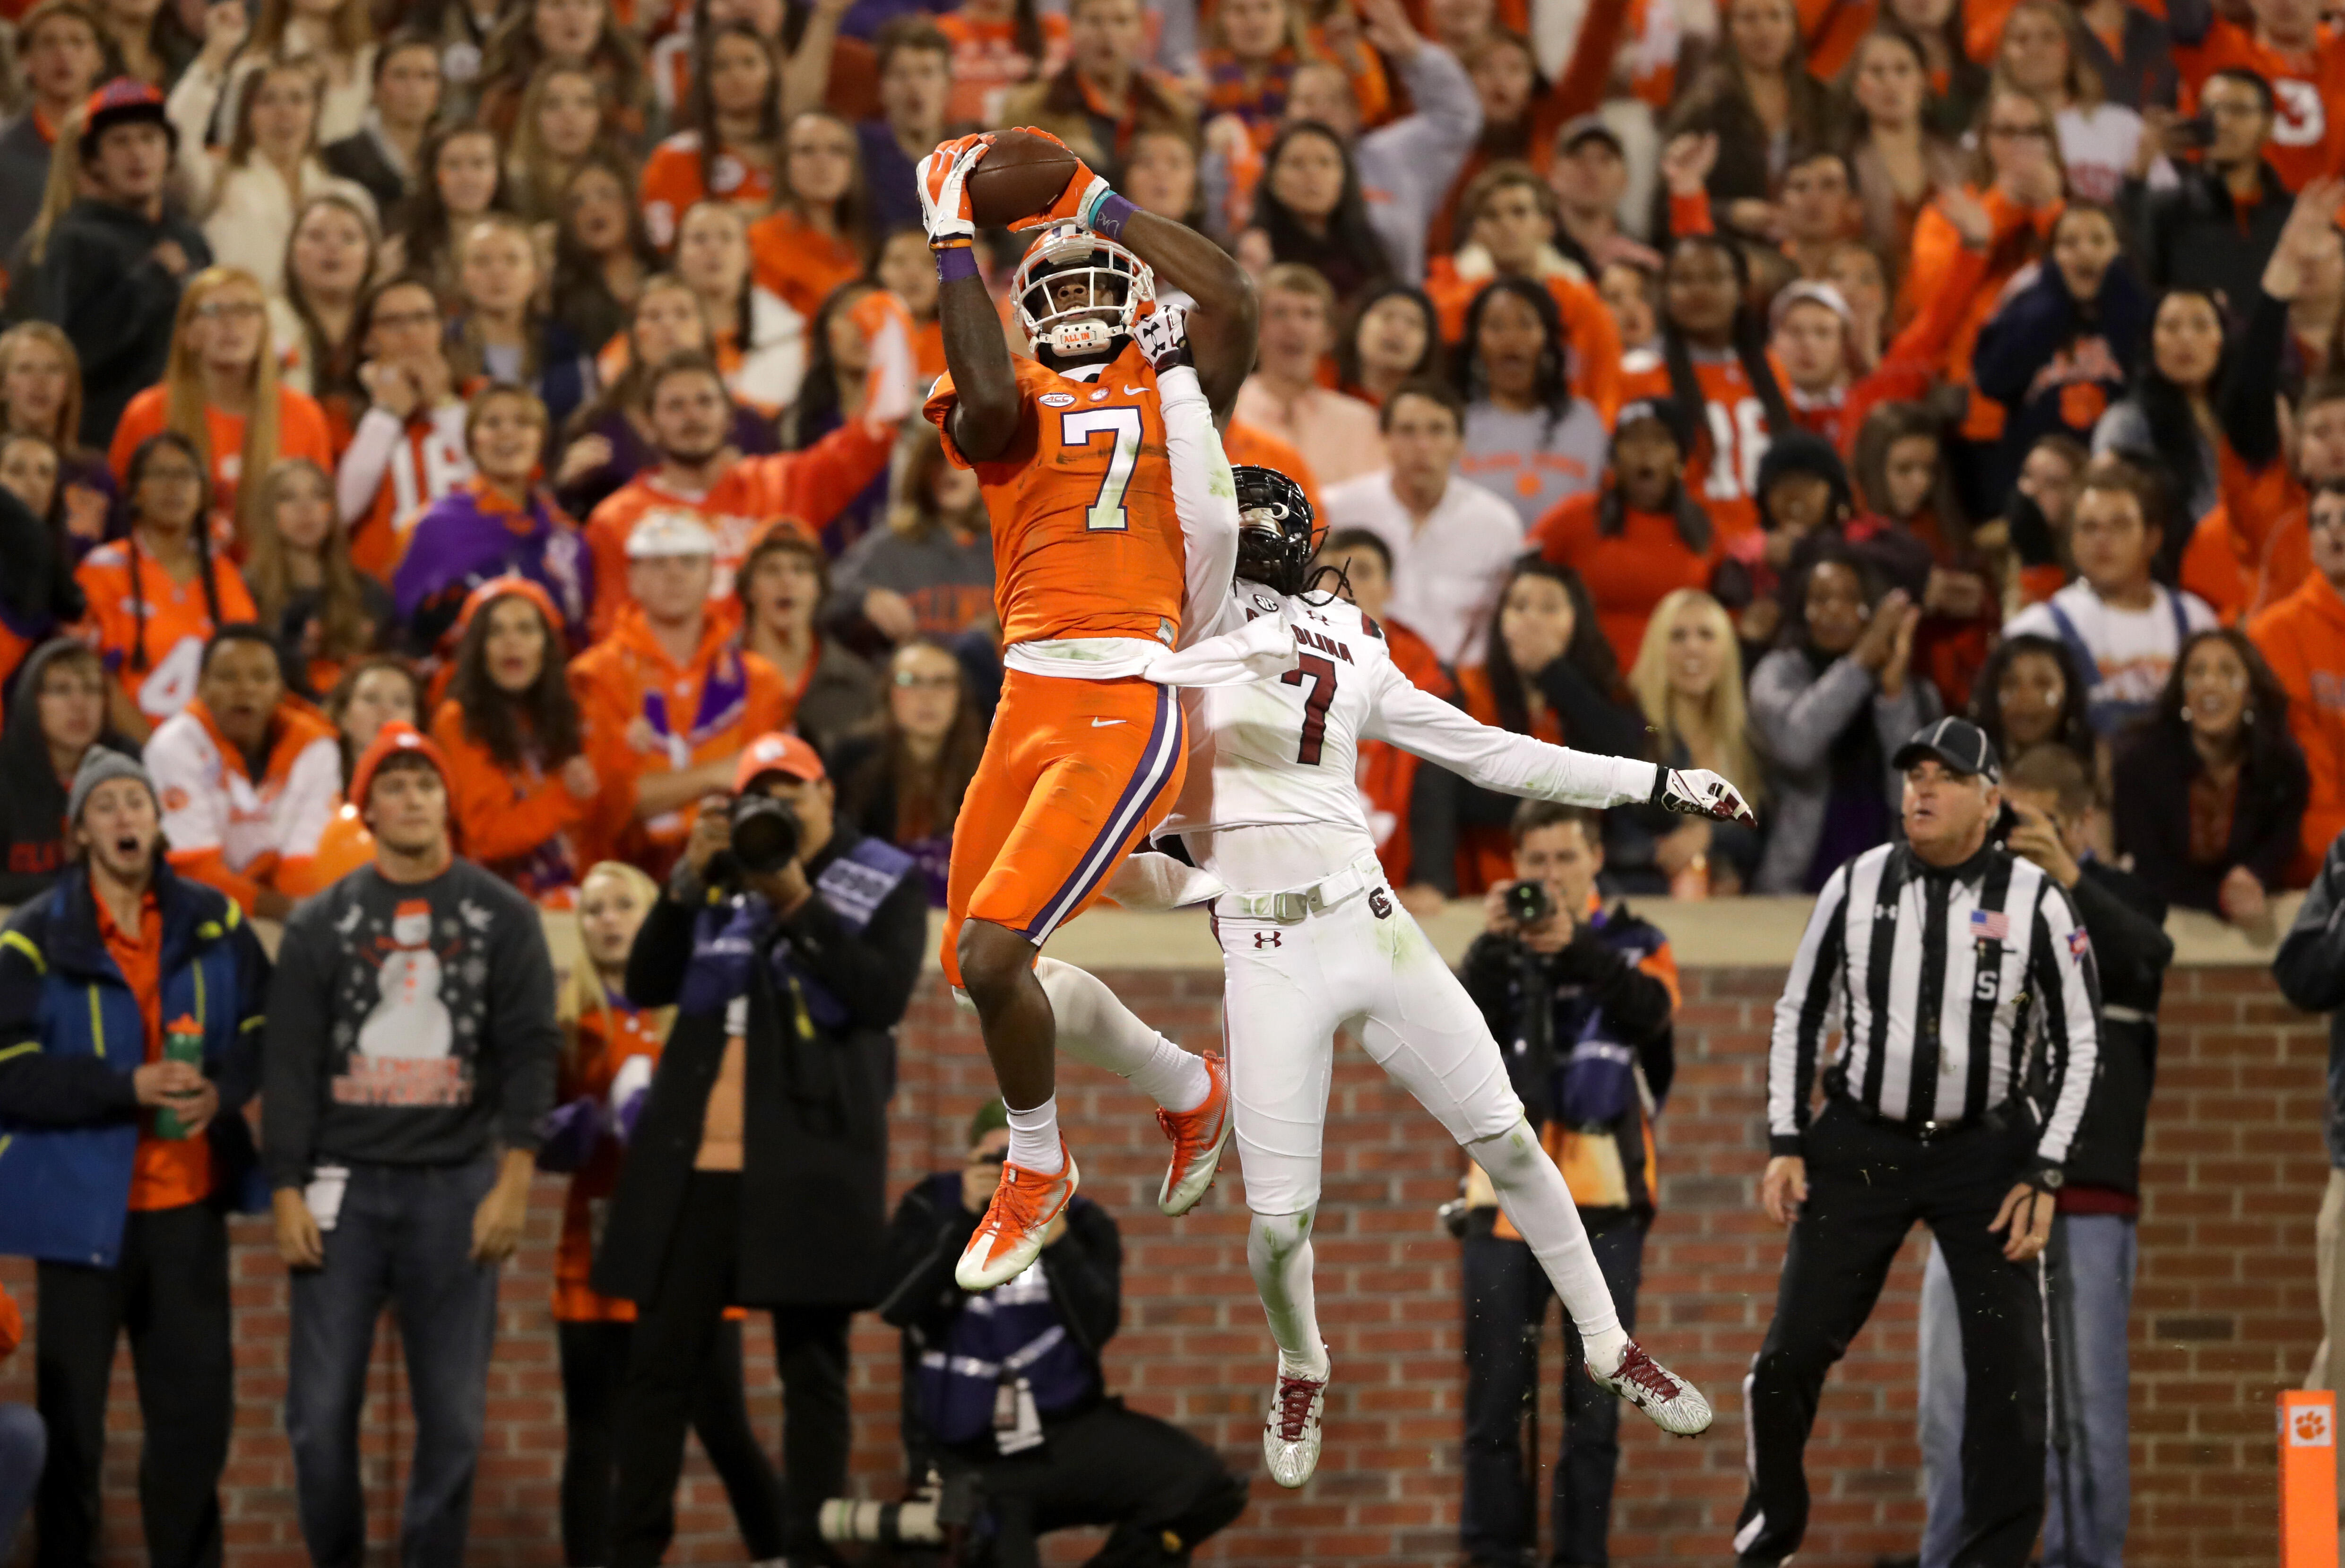 CLEMSON, SC - NOVEMBER 26:  Mike Williams #7 of the Clemson Tigers makes a touchdown catch over Jamarcus King #7 of the South Carolina Gamecocks during their game at Memorial Stadium on November 26, 2016 in Clemson, South Carolina.  (Photo by Streeter Lec